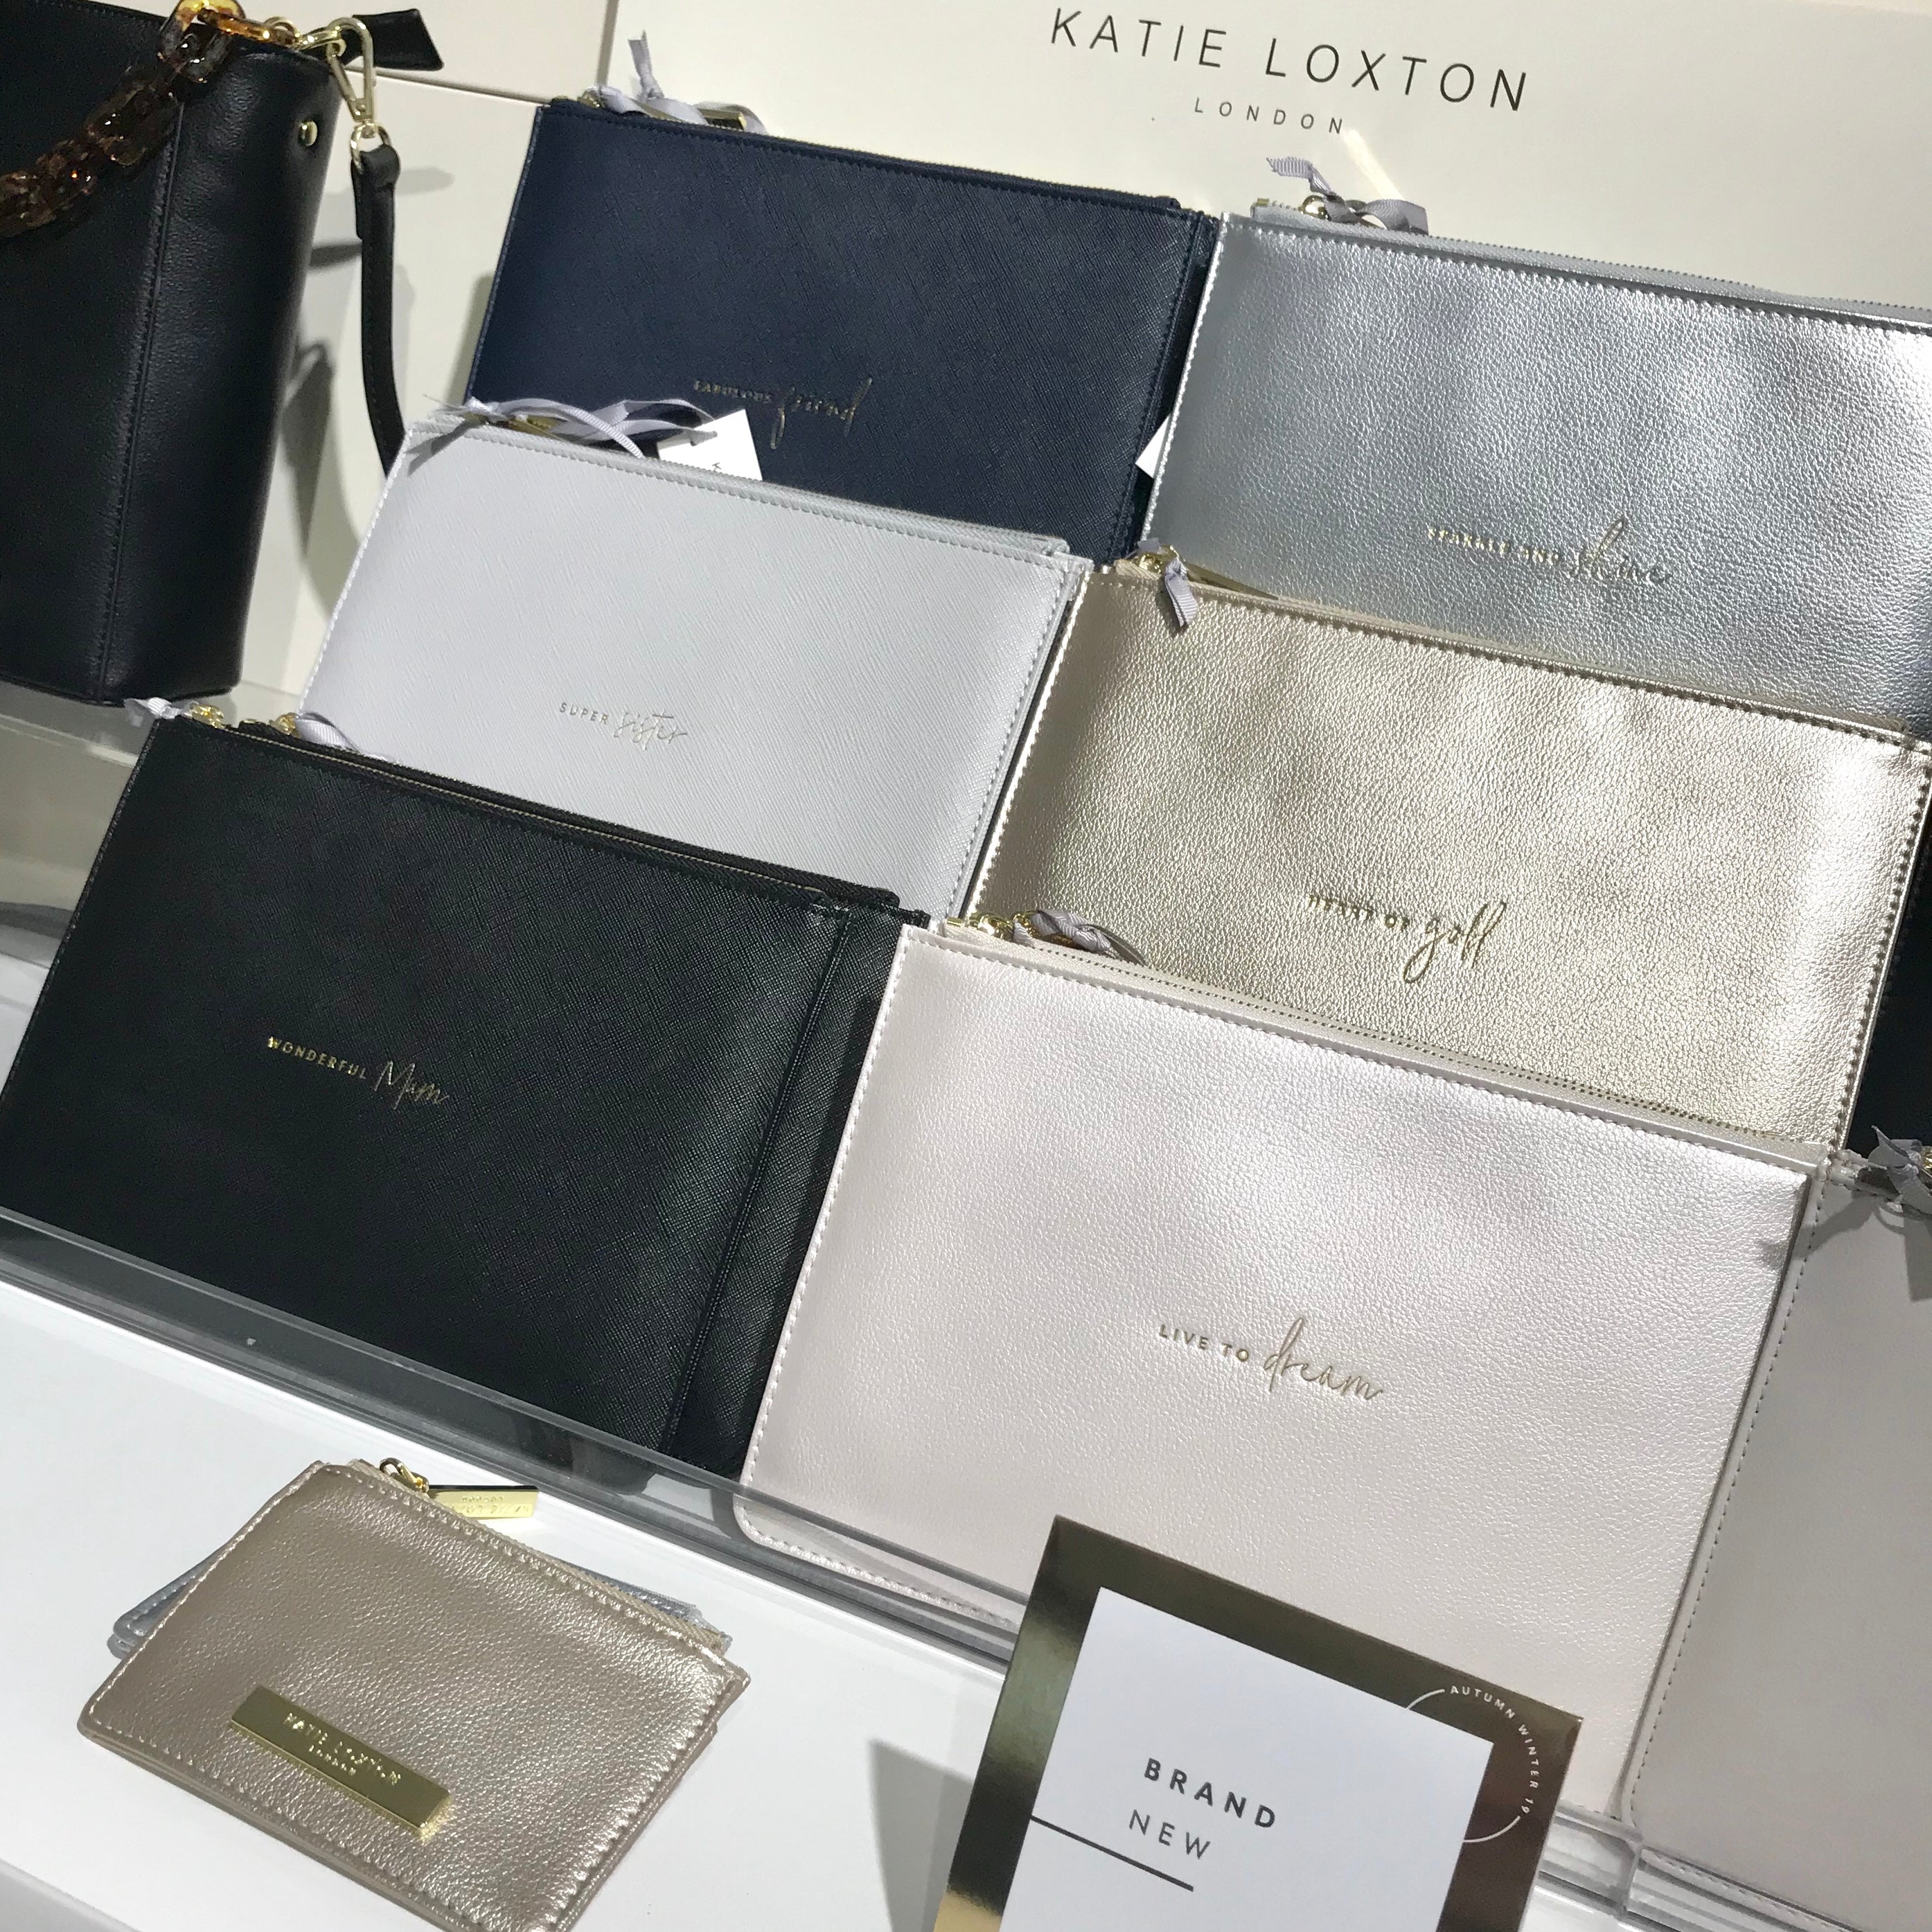 Add a little Luxe to your world with Katie Loxton